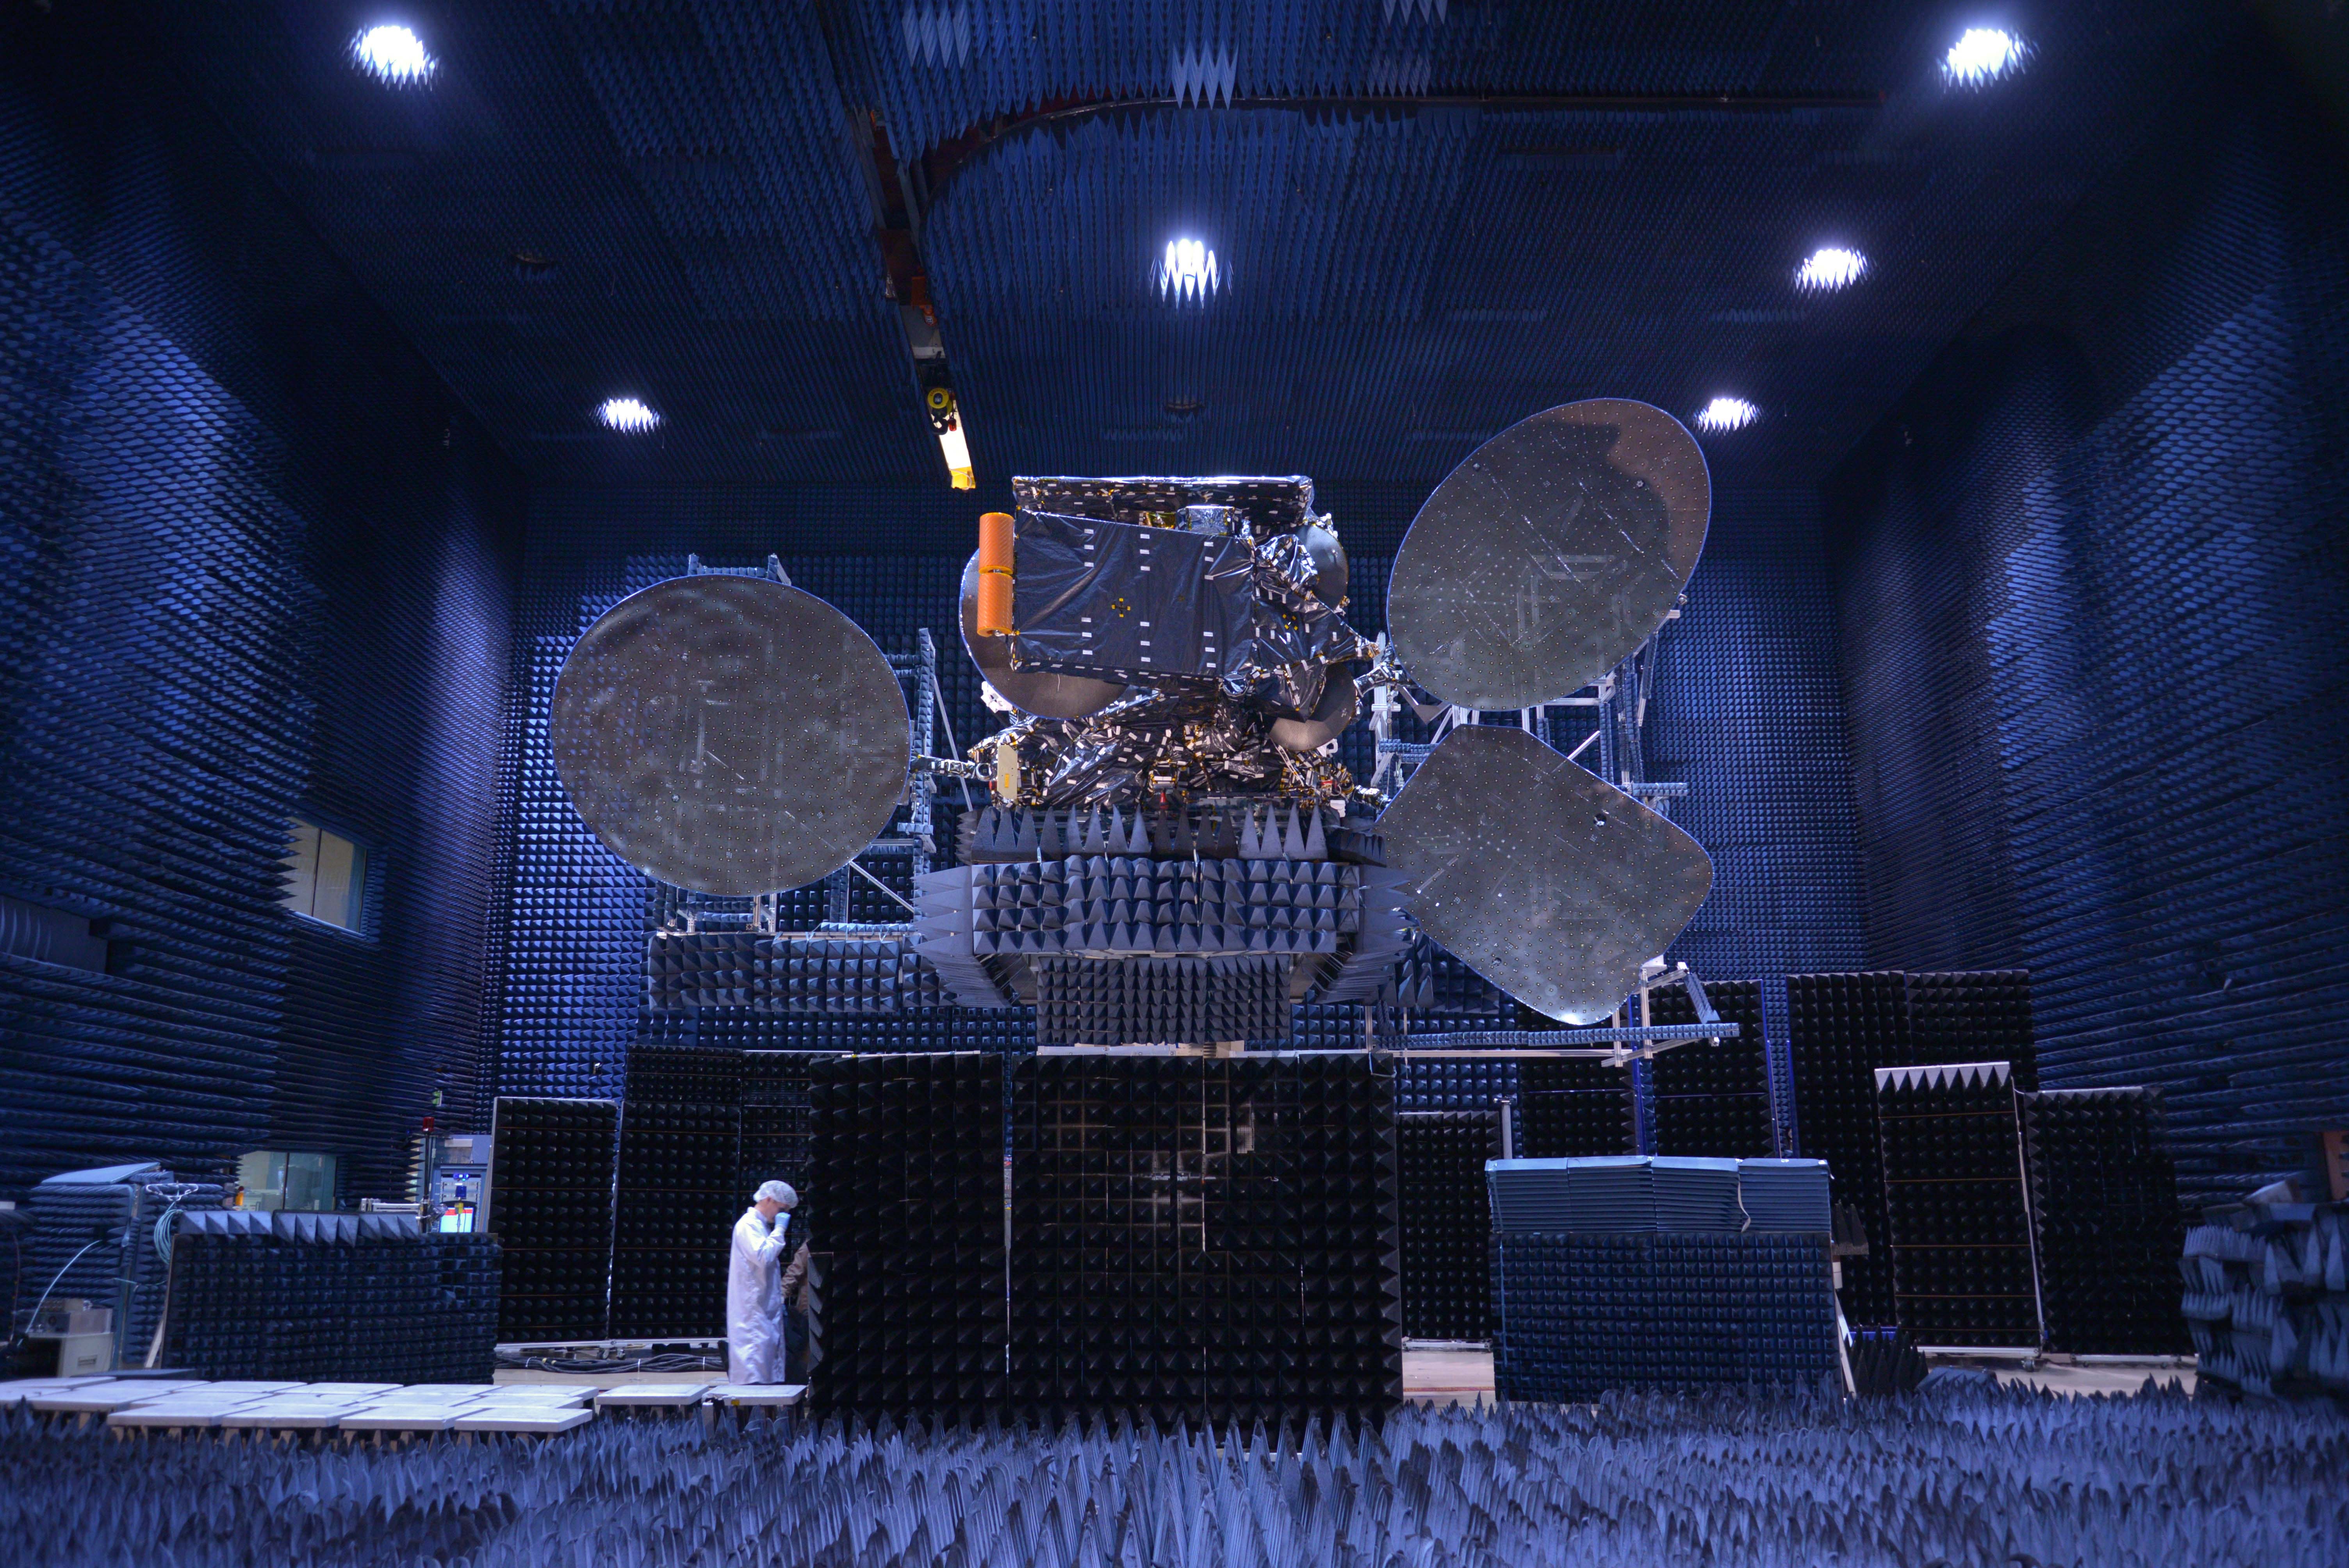 The Intelsat 34 satellite built by SSL is now at launch base